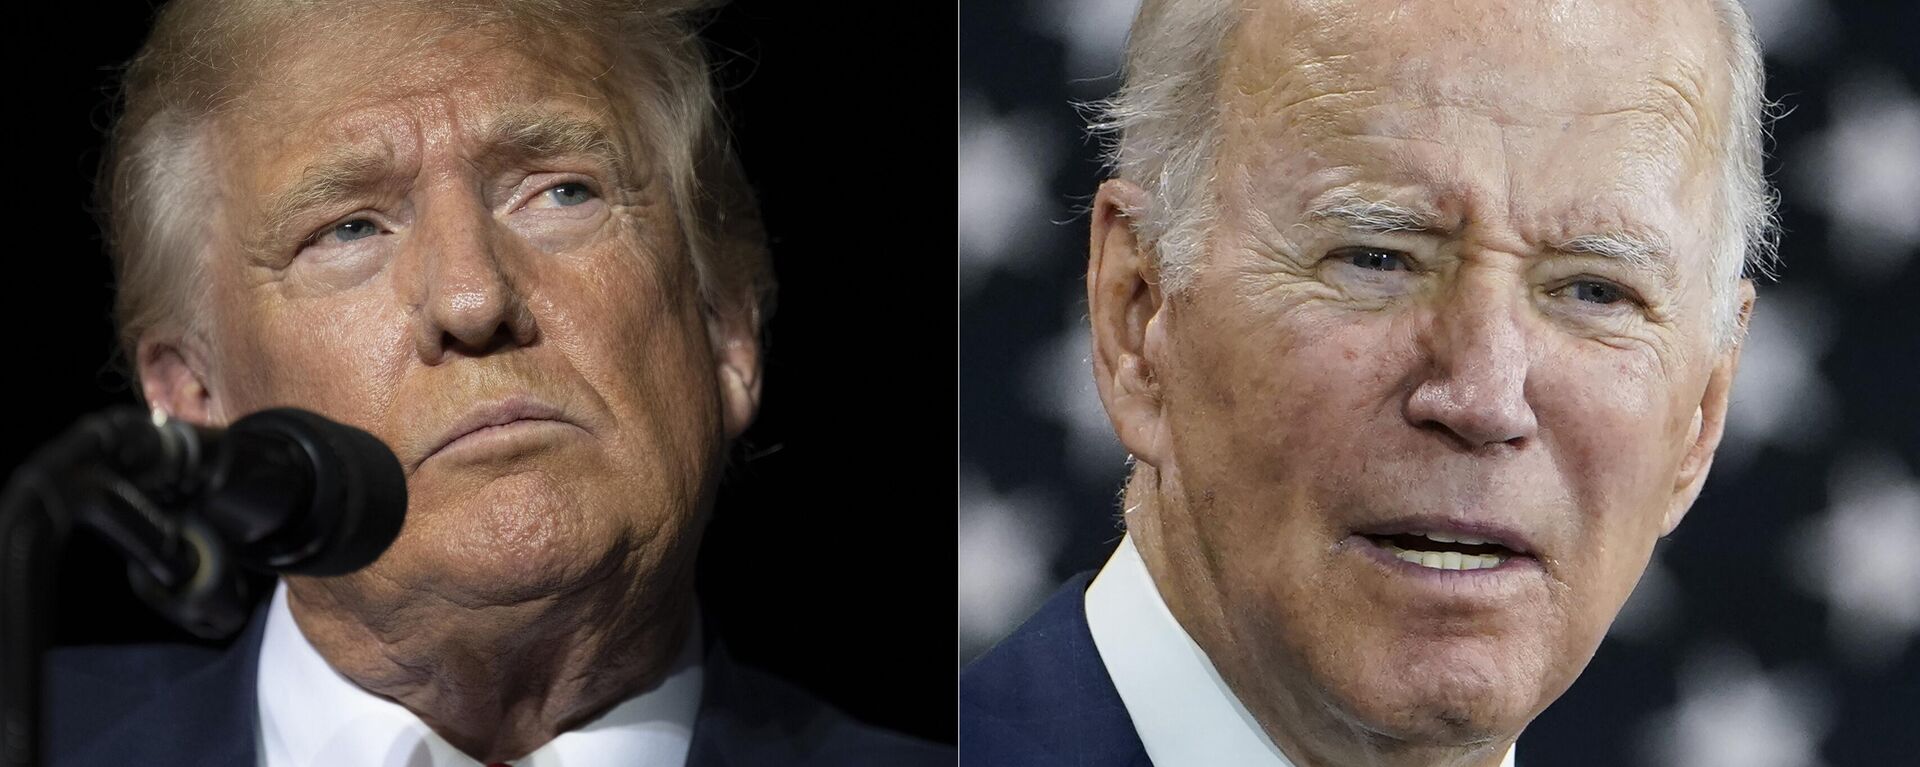 This combination of photos shows former President Donald Trump, left, and President Joe Biden, right. Biden and Trump are preparing for a possible rematch in 2024. But a new poll finds a notable lack of enthusiasm within the parties for either man as his party's leader, and a clear opening for new leadership. The poll from The Associated Press-NORC Center for Public Affairs Research finds a third of both Democrats and Republicans are unsure of who they want leading their party.  - Sputnik International, 1920, 26.06.2023